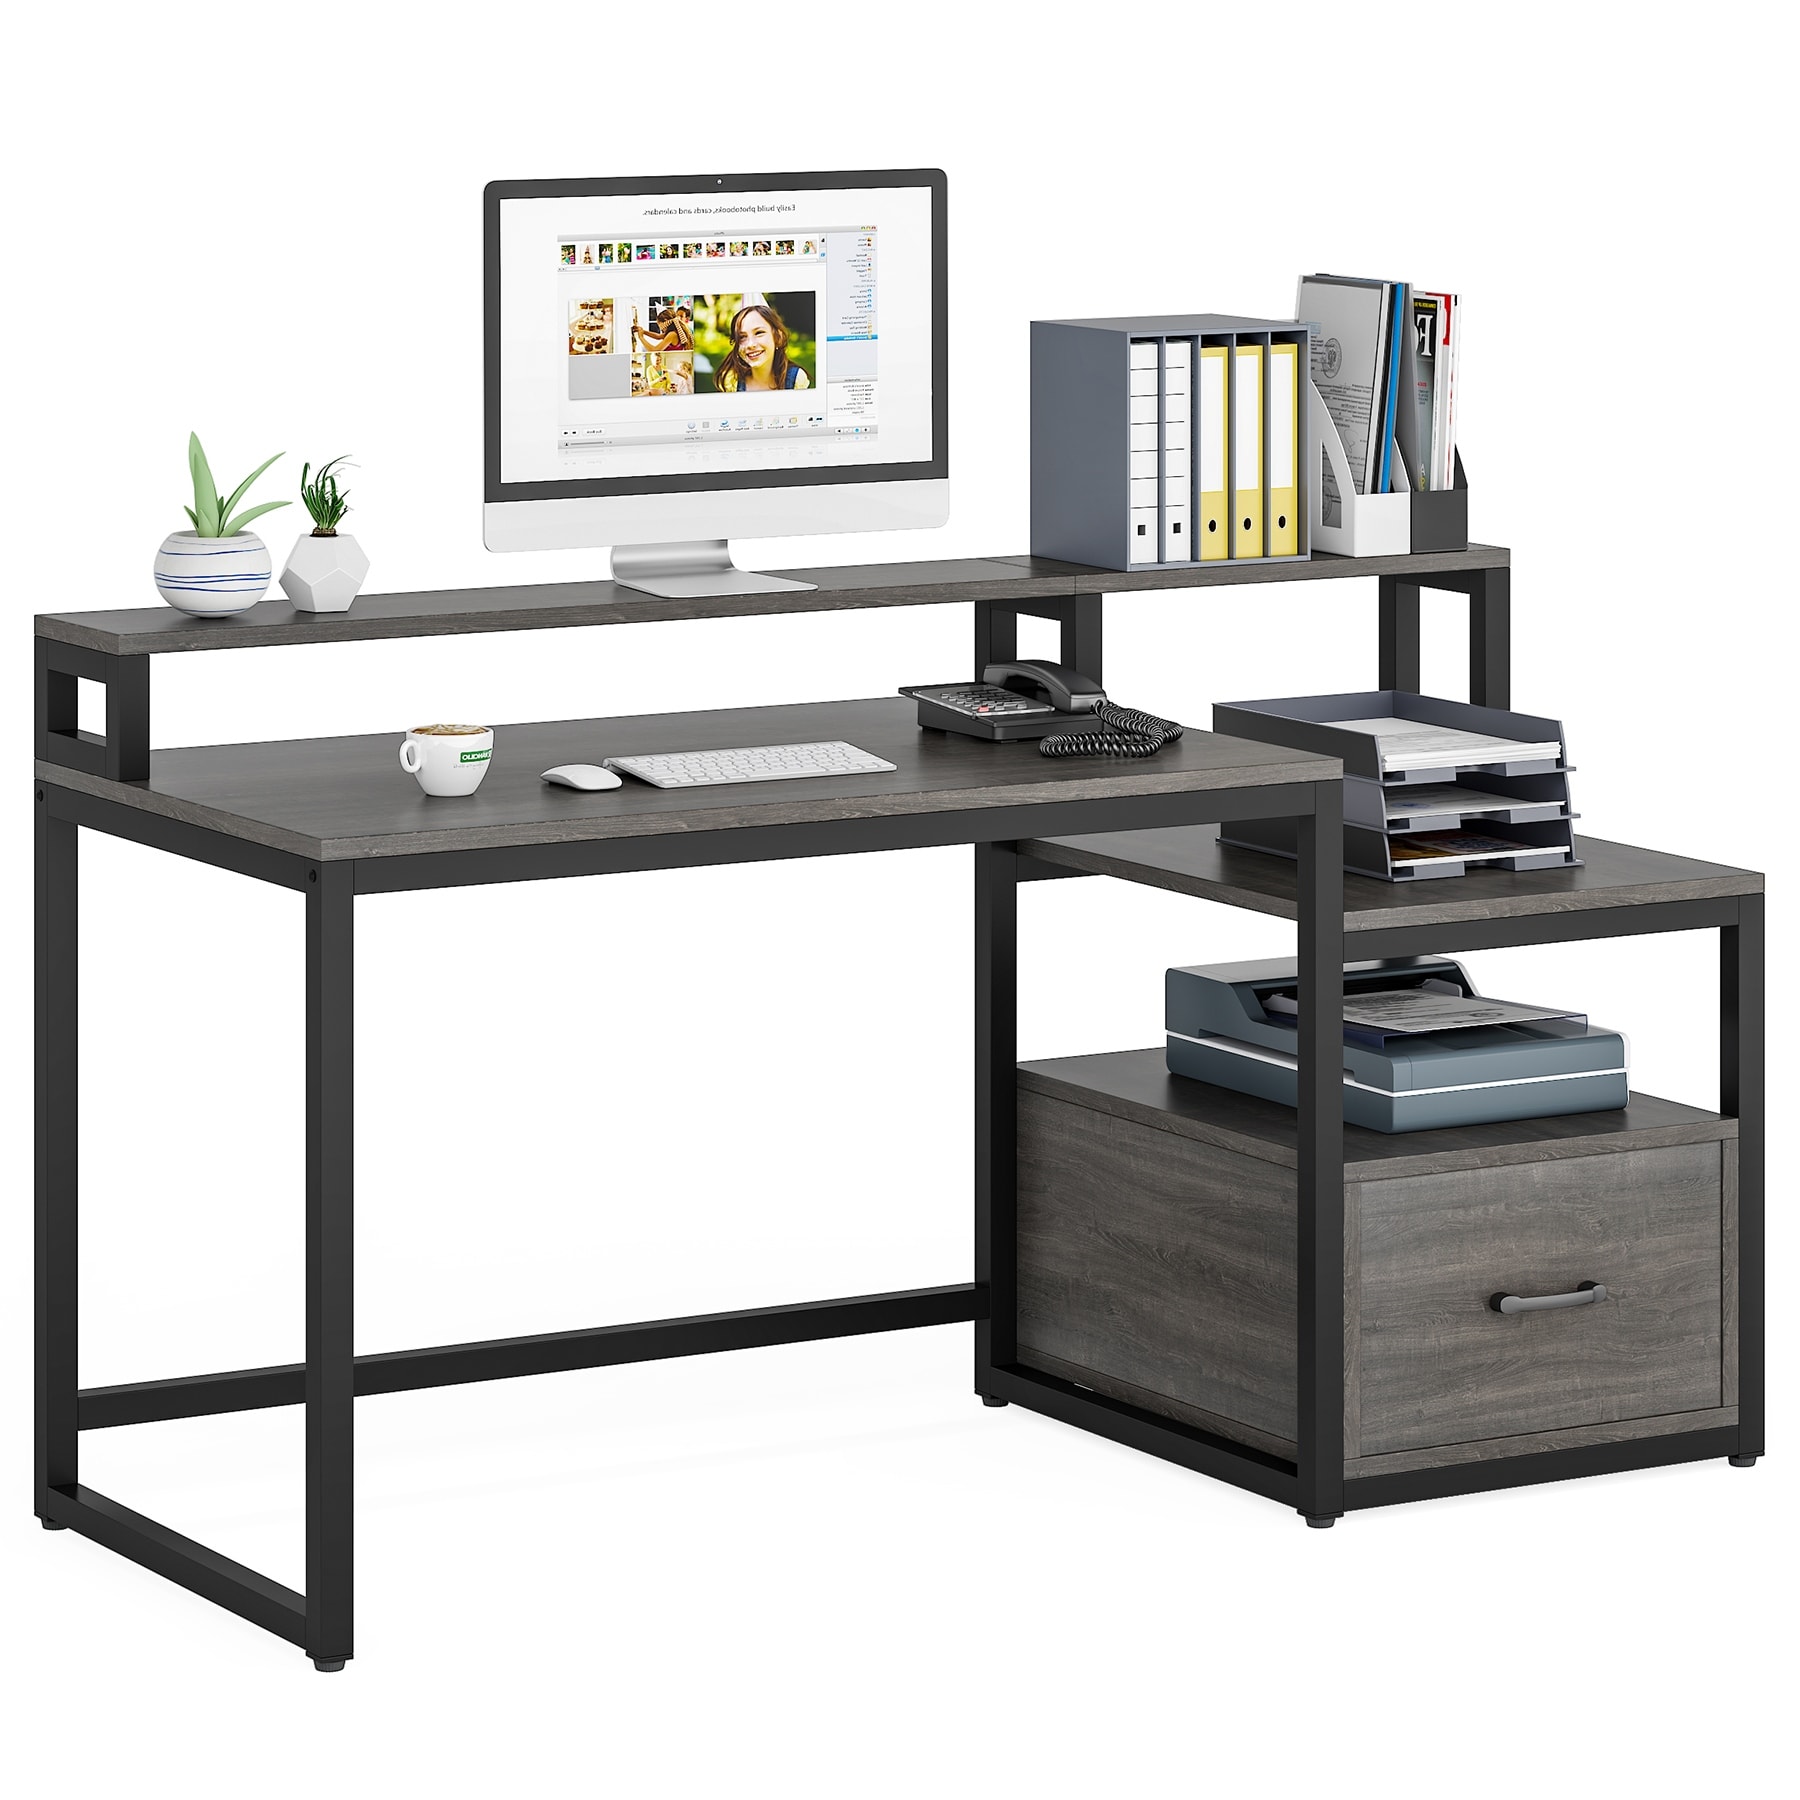 https://ak1.ostkcdn.com/images/products/is/images/direct/7cff0556d38cc40cb9a71c30c54fd28e8fecc62b/Computer-Desk-with-File-Drawer-and-Storage-Shelves%2C-Industrial-Home-Office-Desk-with-Hutch.jpg